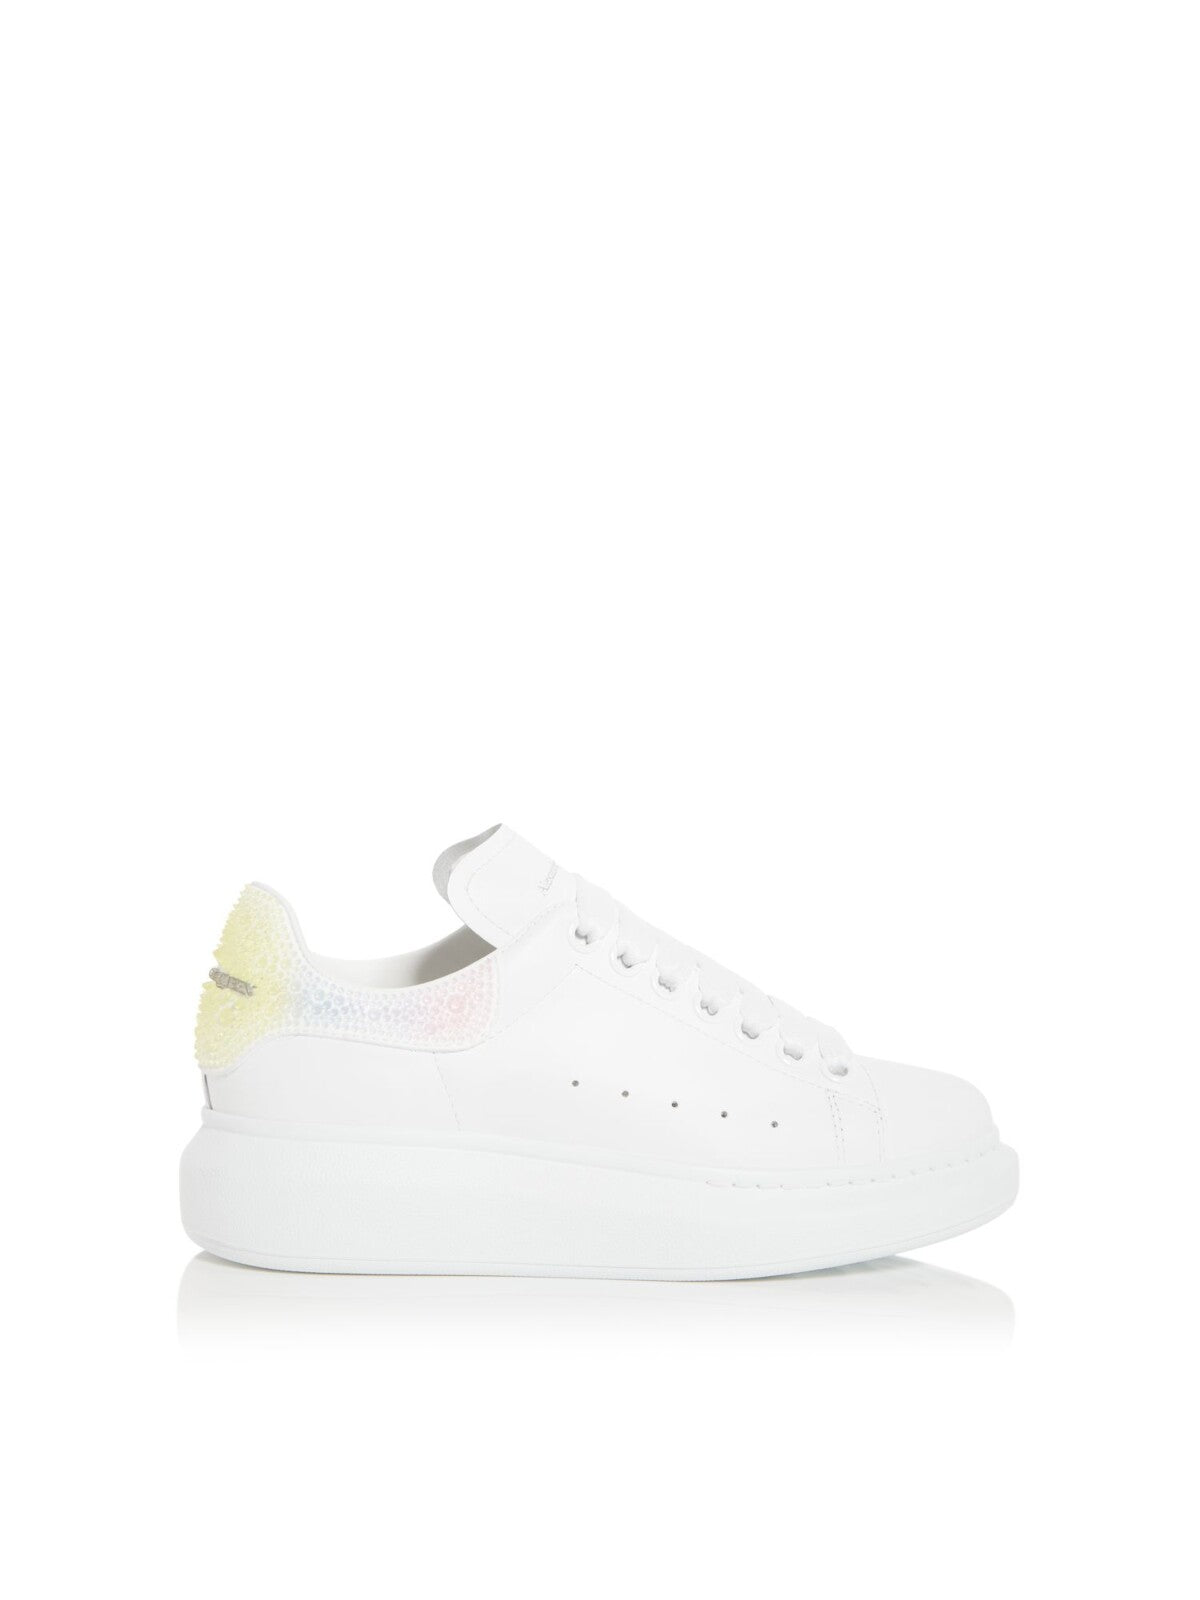 ALEXANDER MCQUEEN Womens White 1" Platform Embellished Padded Round Toe Wedge Lace-Up Sneakers Shoes 37.5